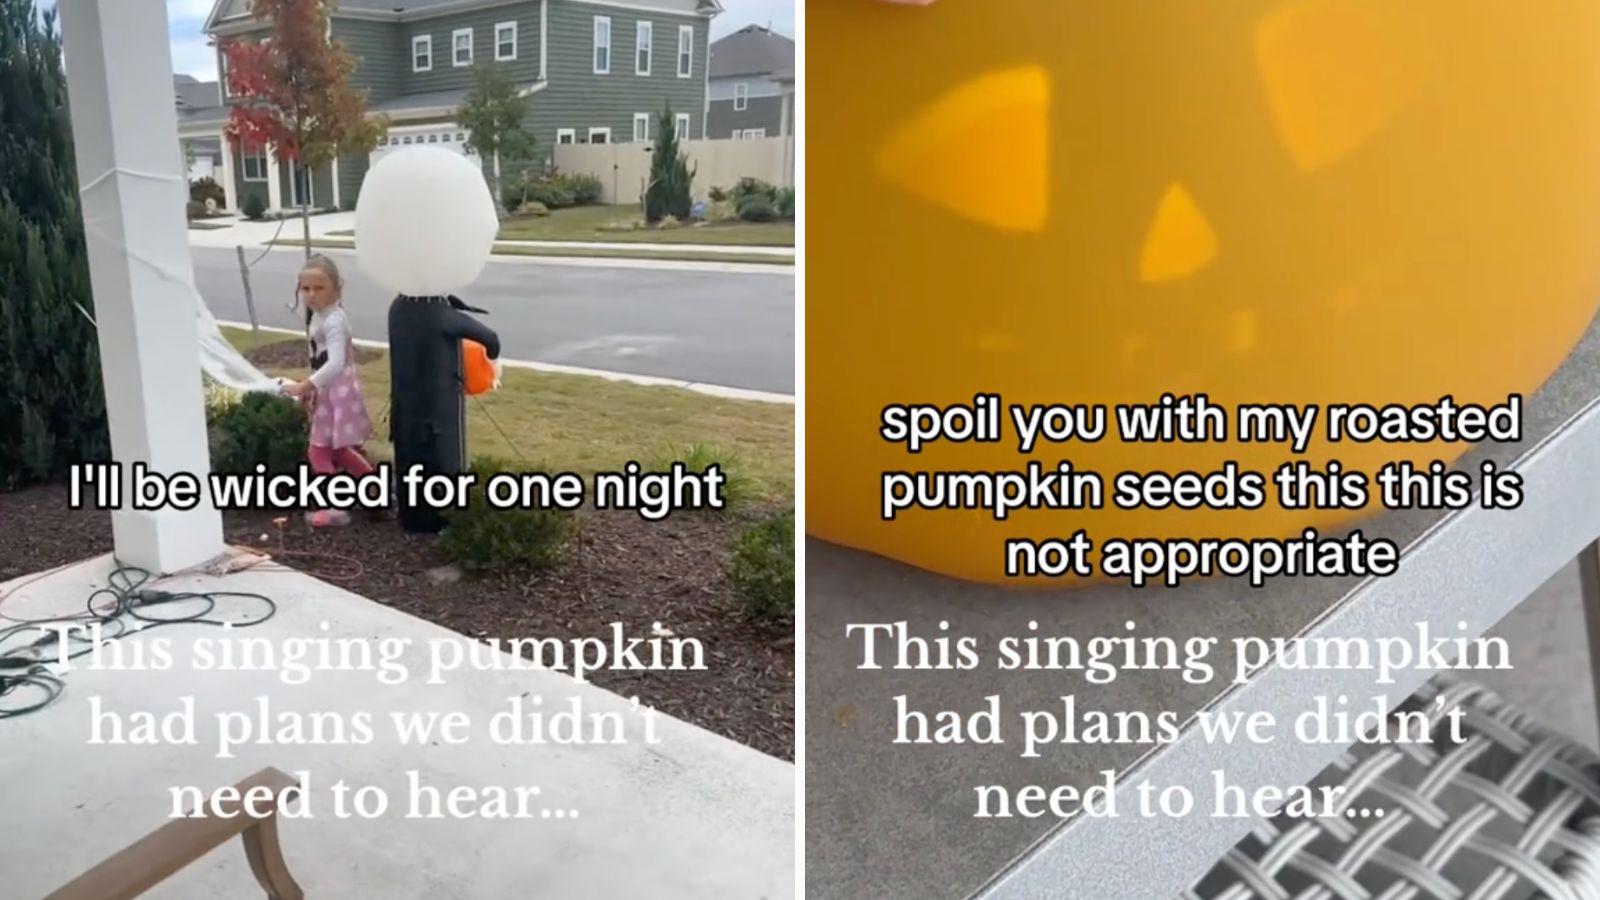 LED pumpkin singing a song with 'inappropriate' lyrics